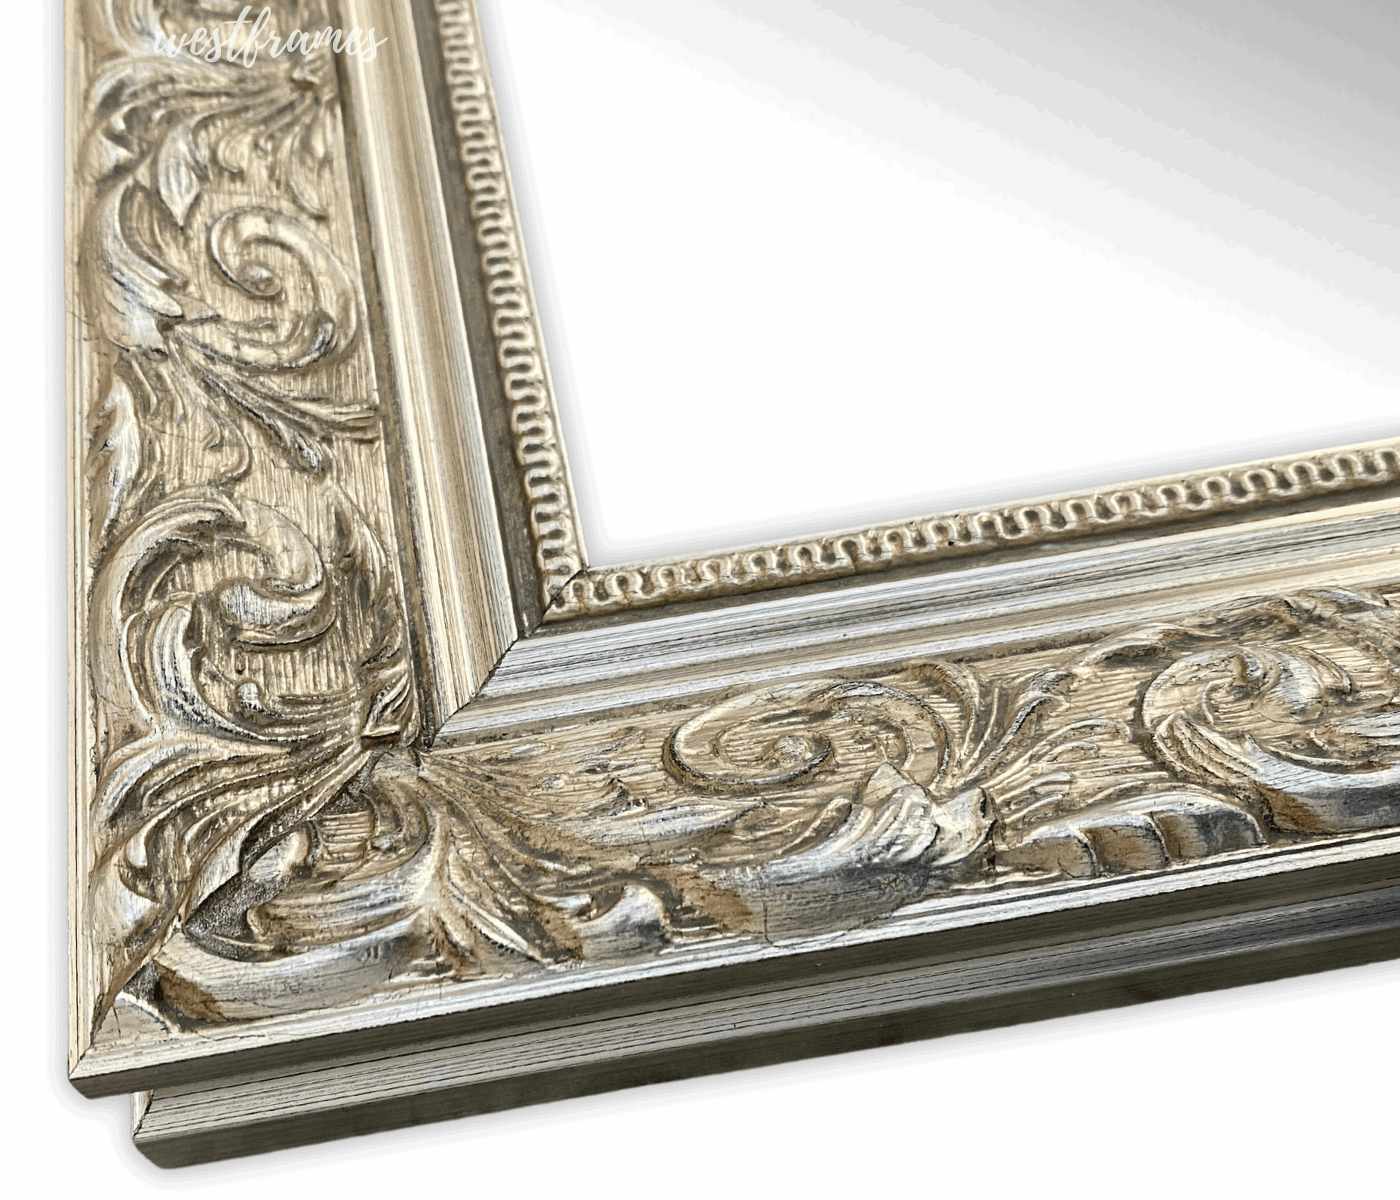 Bella French Ornate Embossed Framed Wall Mirror Antique Silver Gold Finish - West Frames